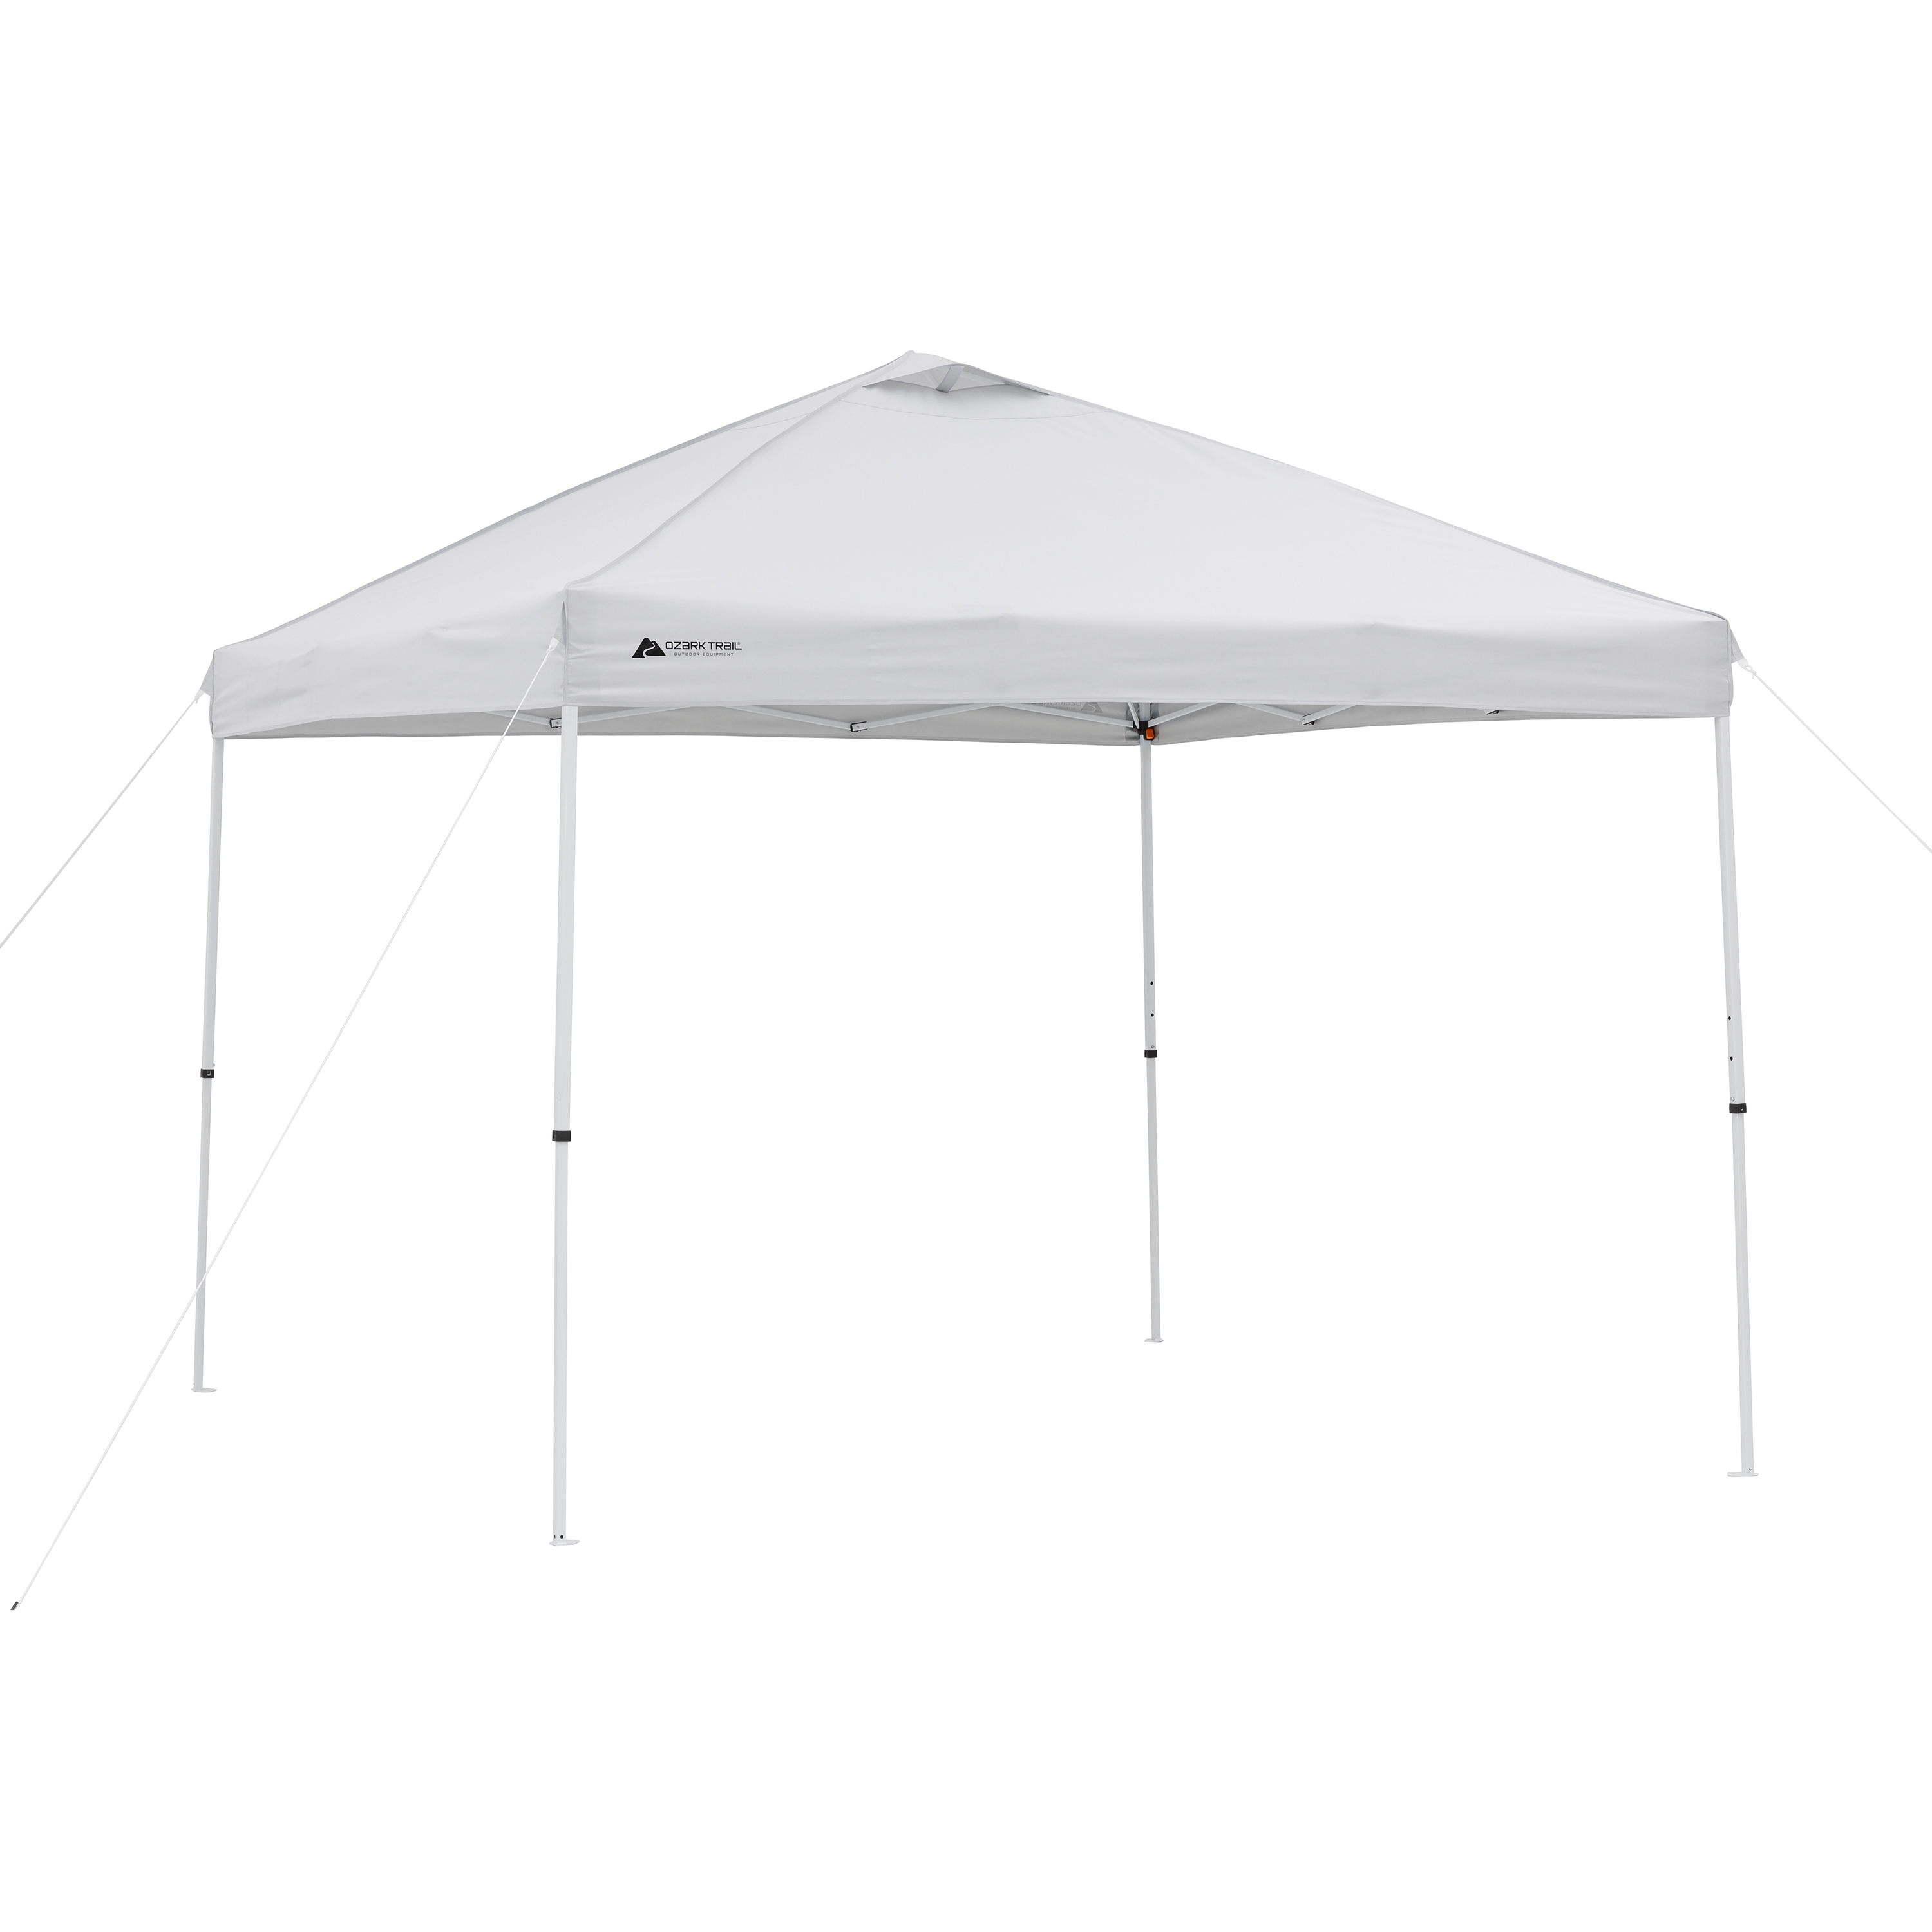 Ozark Trail Instant Canopy, 10' x 10' - image 1 of 7